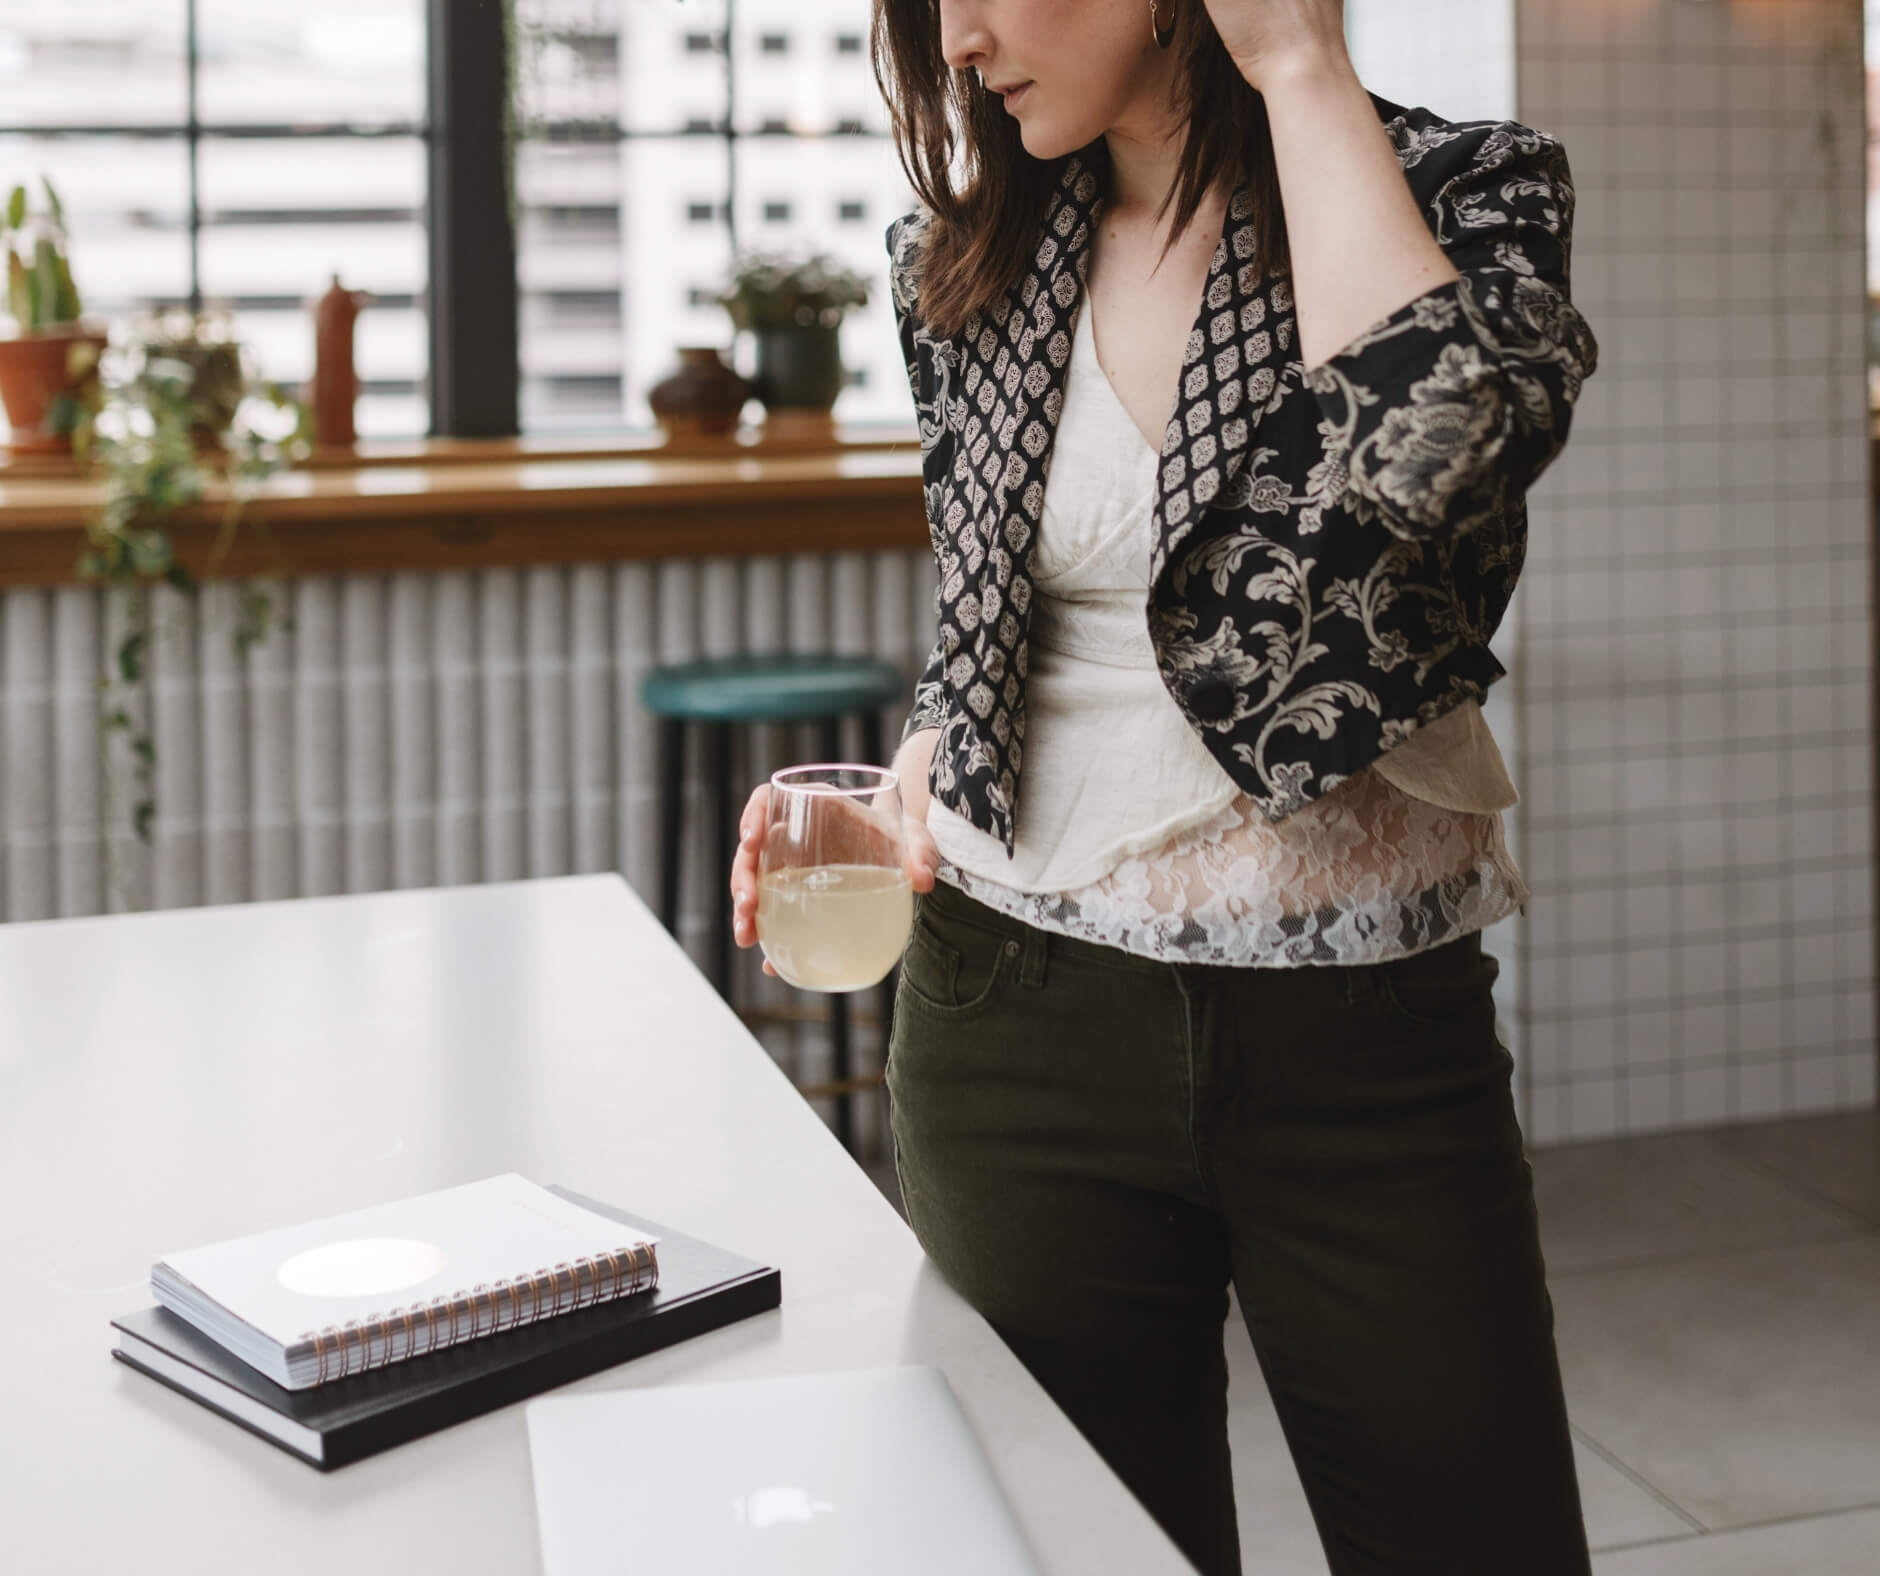 A woman in a patterned blazer and green trousers stands by a table holding a glass, with a laptop and notebook nearby, working on website design.